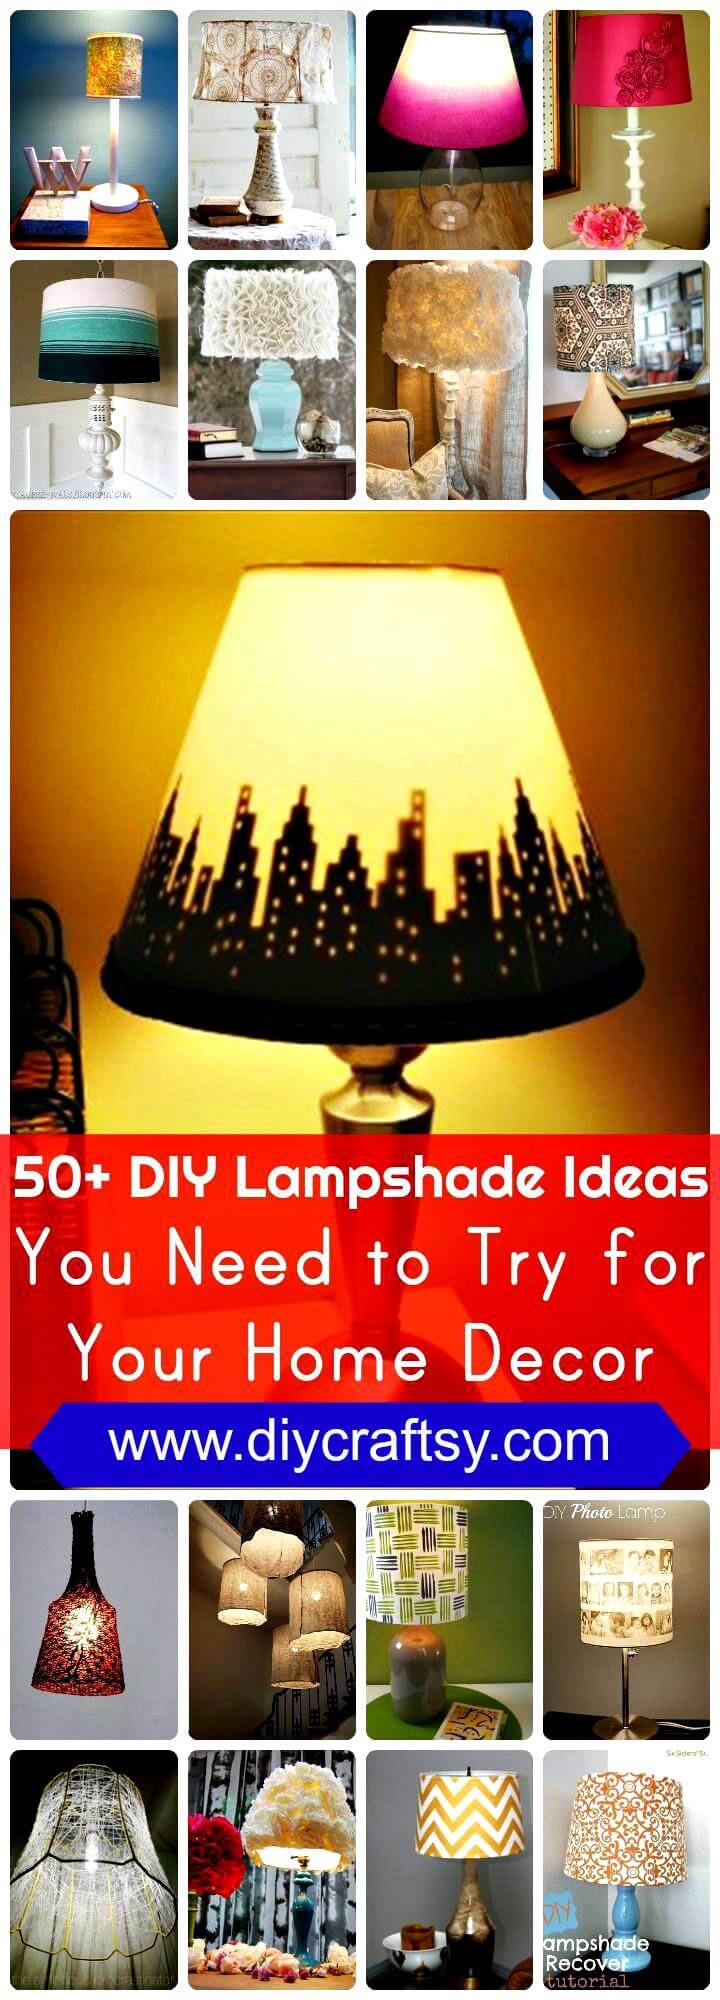 50-DIY-Lampshade-Ideas-You-Need-to-Try-for-Your-Home-Decor